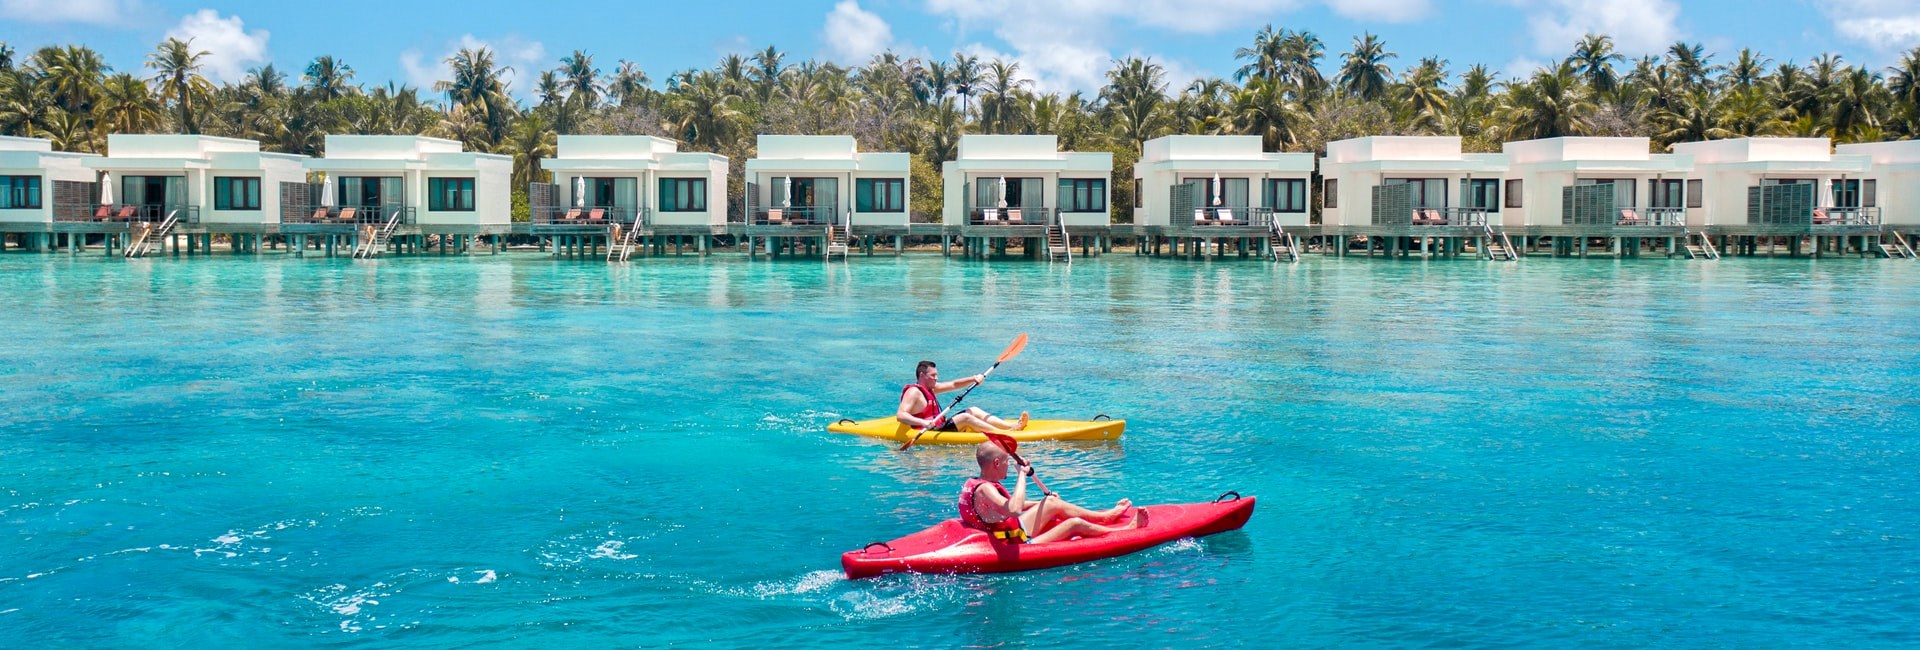 Two men in kayaks on bright blue sea going past overwater villas on a small island